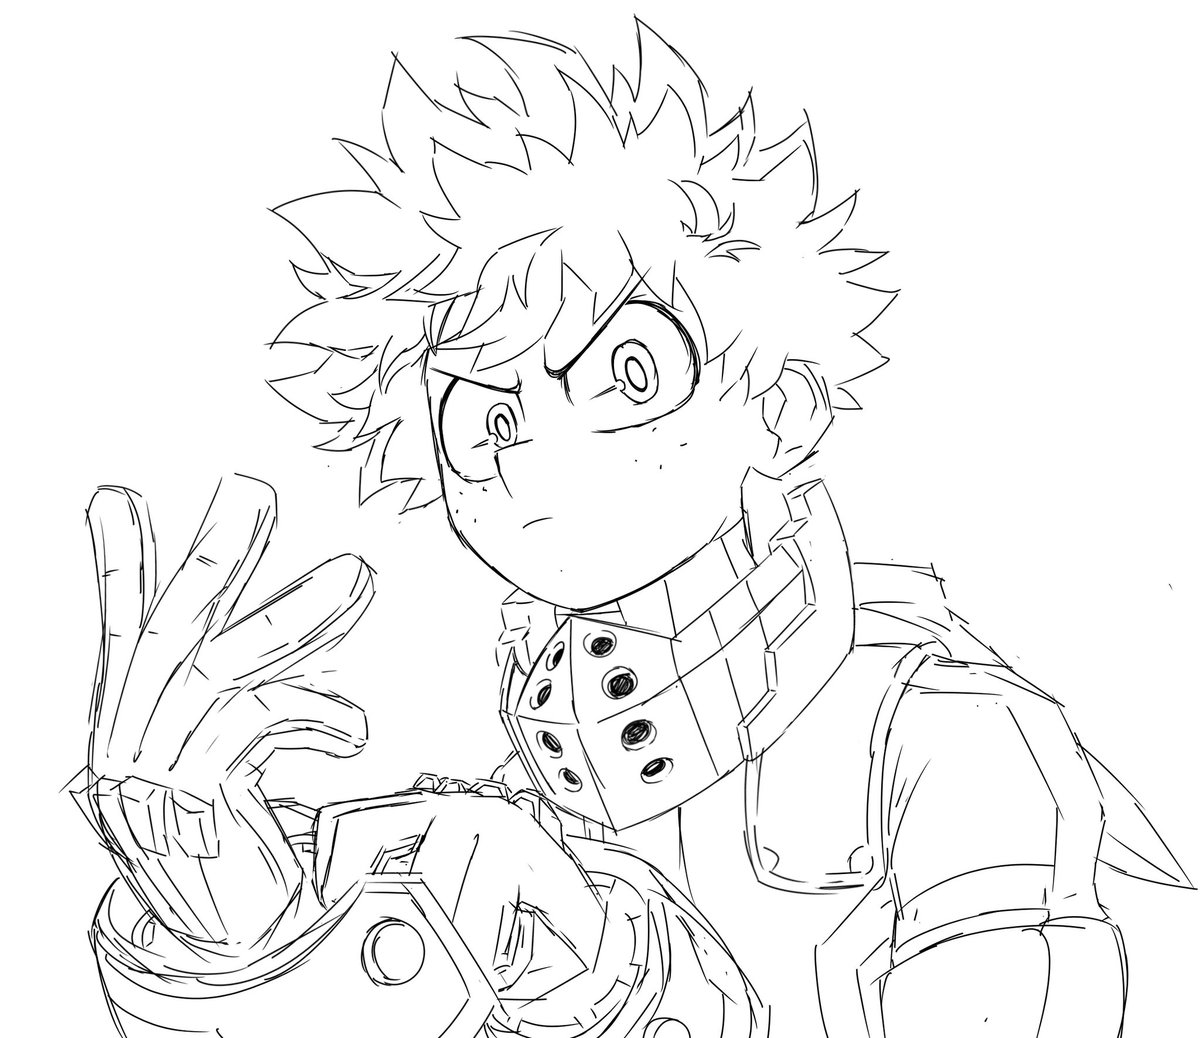 deku wip because the carousel goes up and goes down 